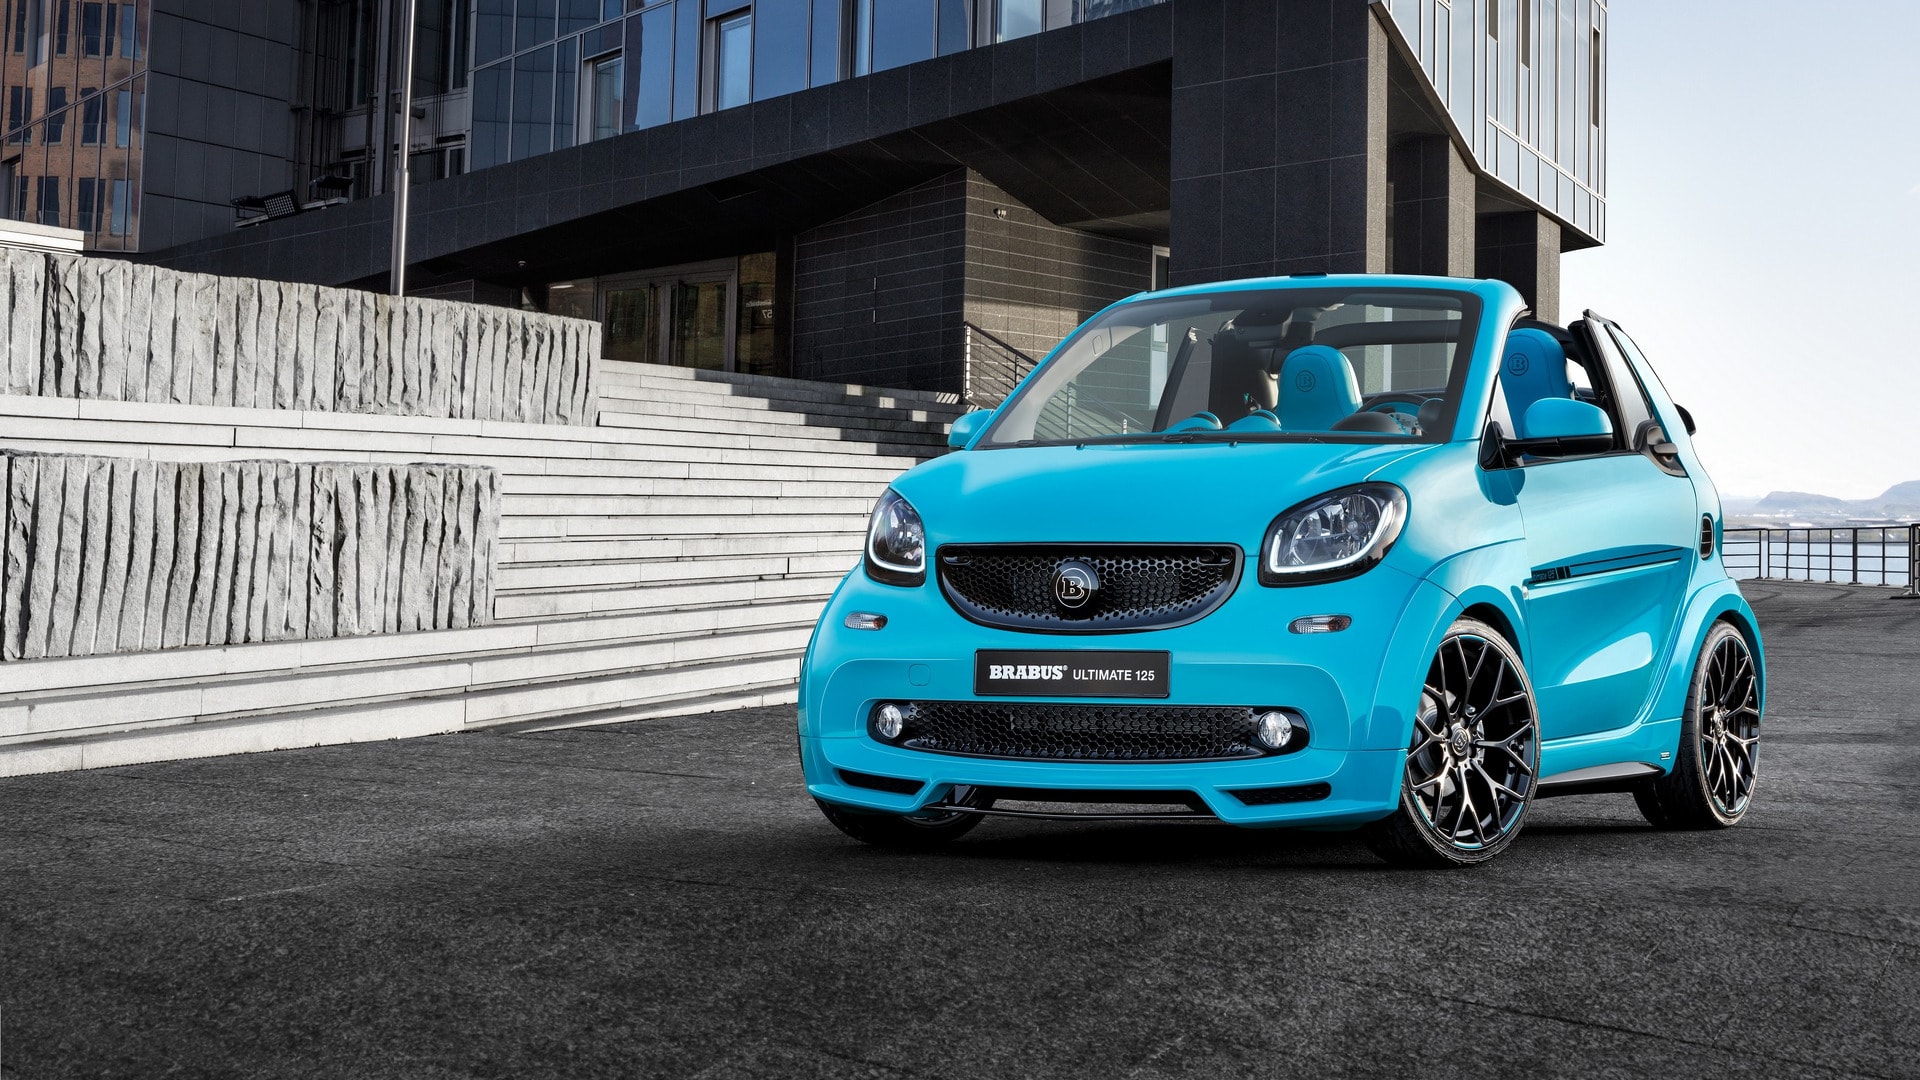 Smart Fortwo and Forfour revealed - Drive